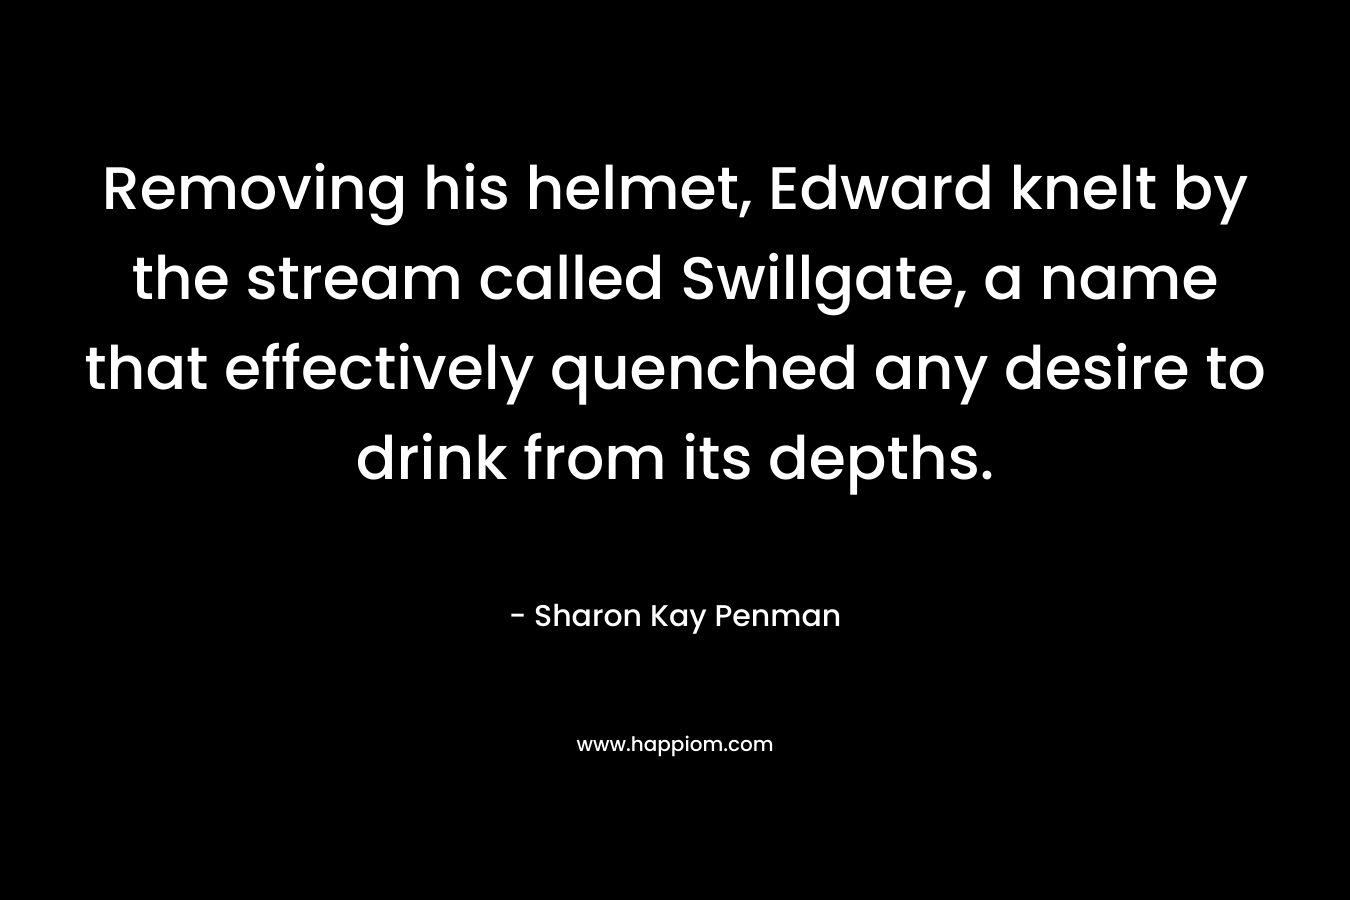 Removing his helmet, Edward knelt by the stream called Swillgate, a name that effectively quenched any desire to drink from its depths.